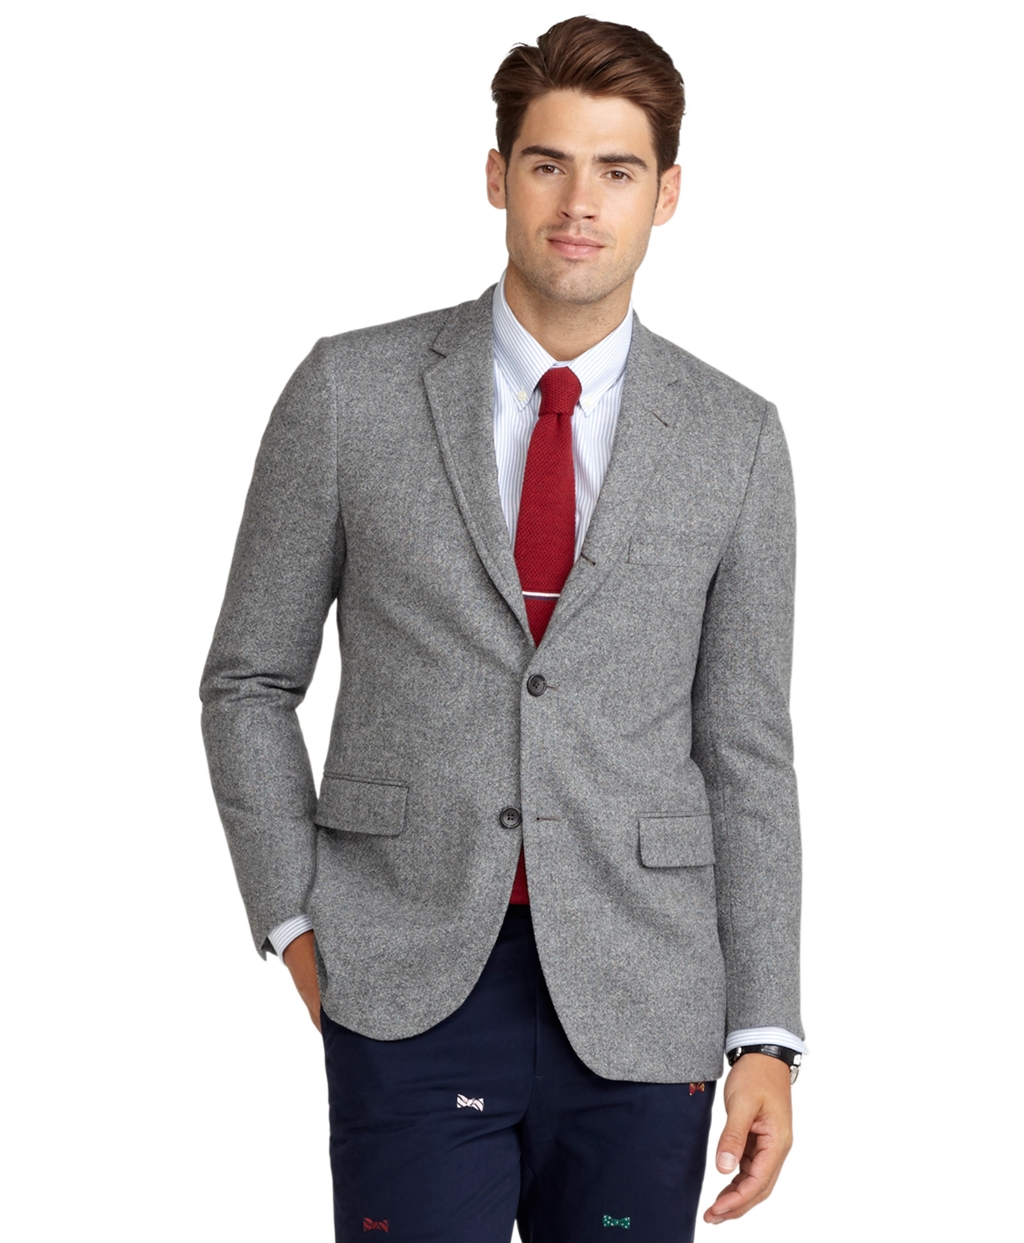 Lyst - Brooks Brothers Cambridge Donegal Sport Coat in Gray for Men